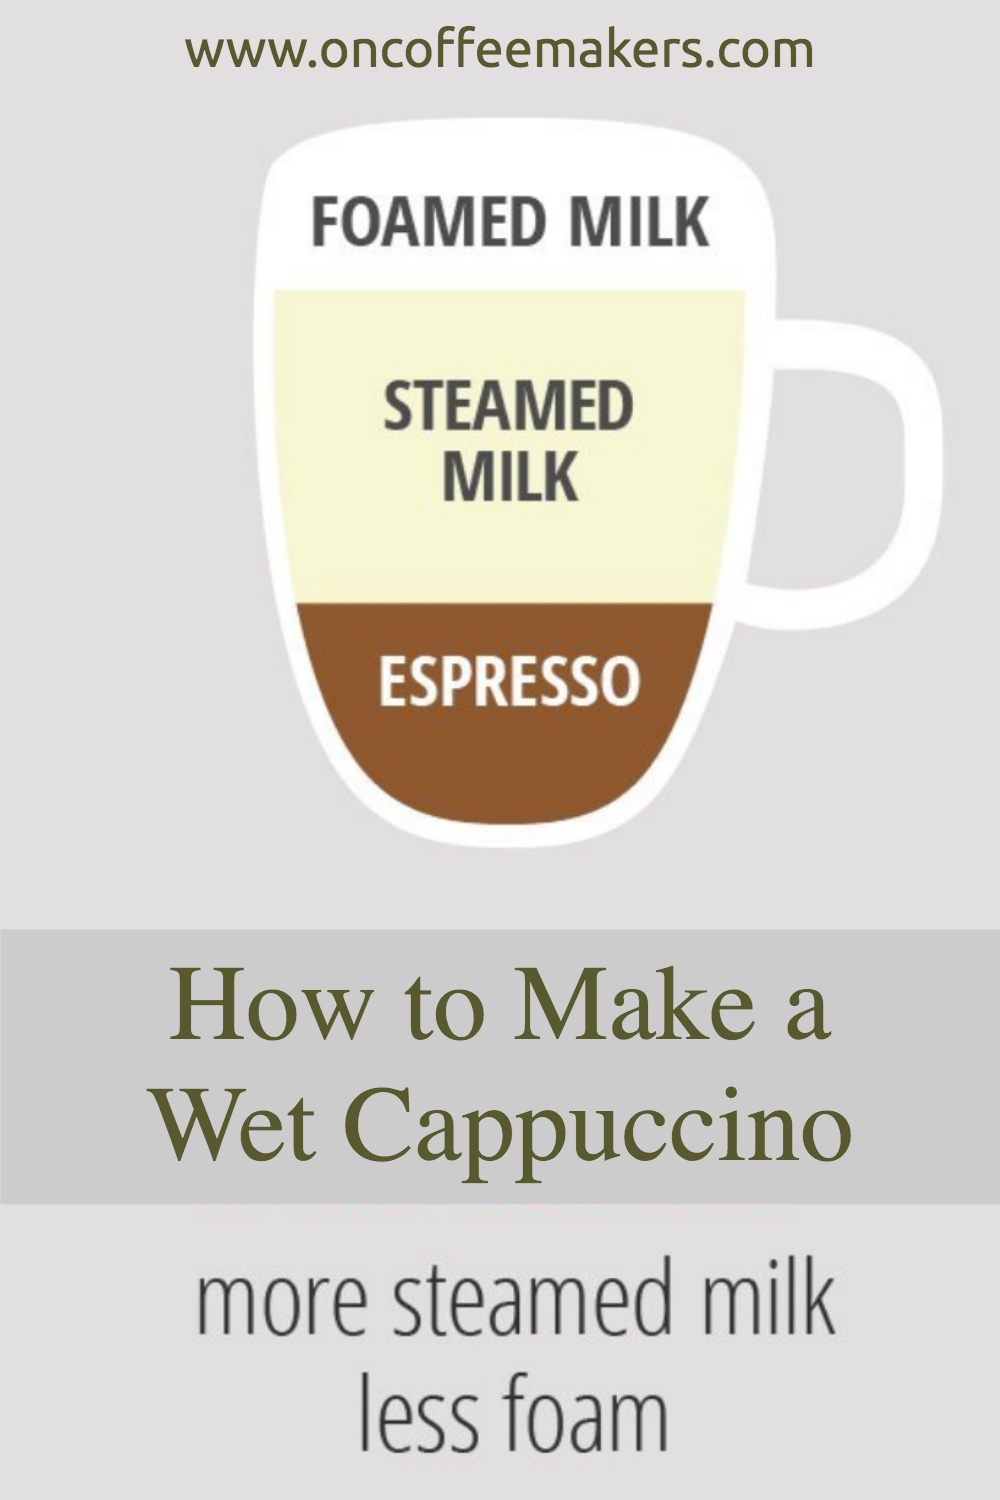 How To Make a Cappuccino